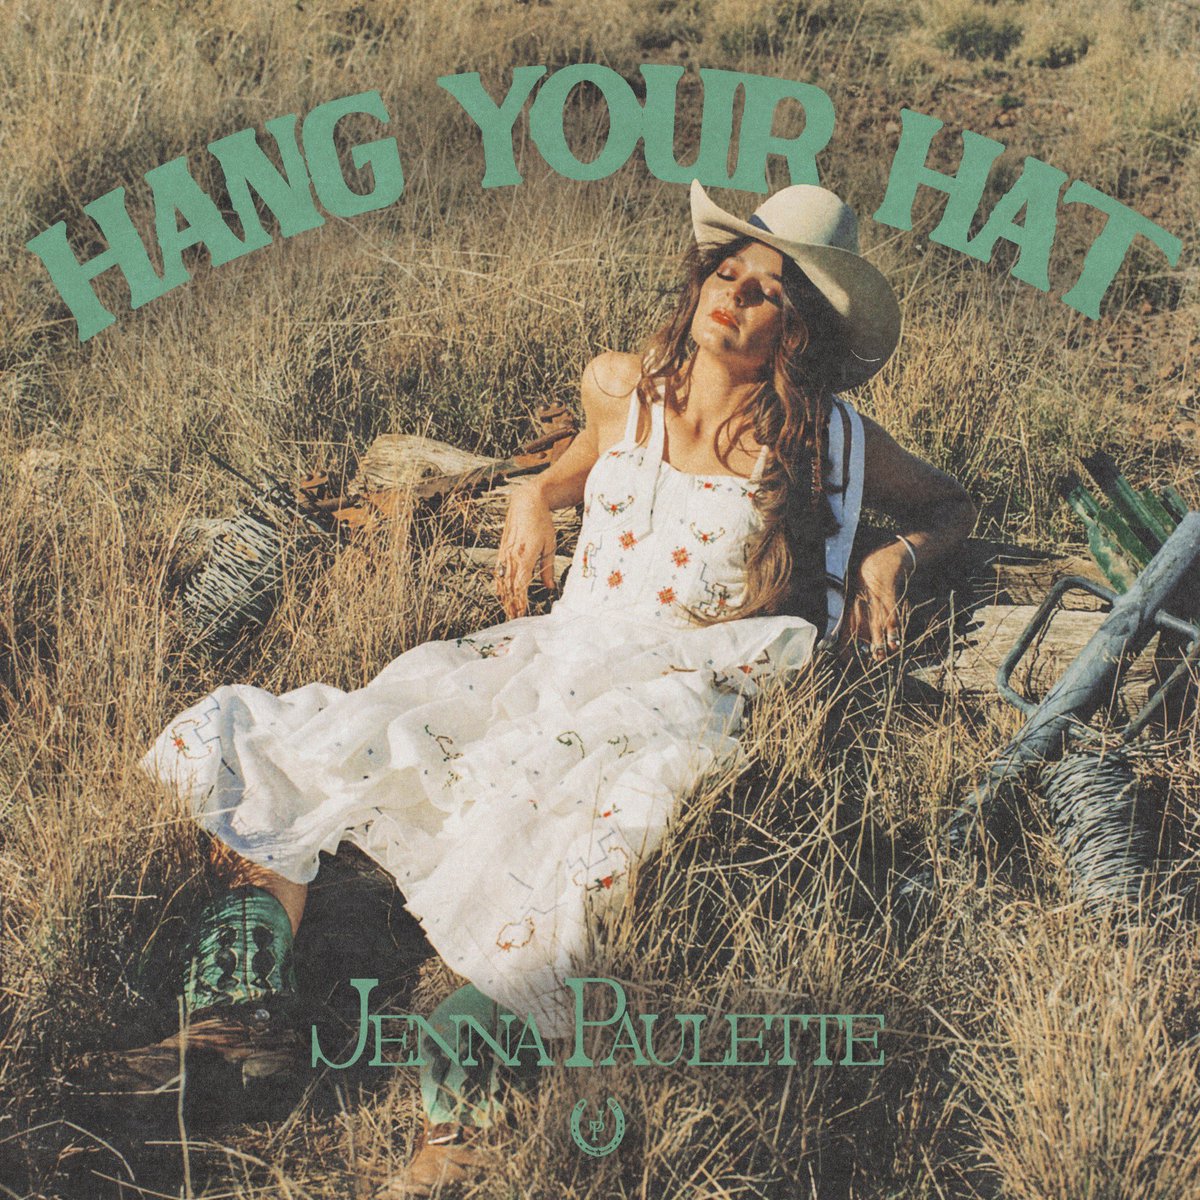 Hang Your Hat” is out now wherever you listen to music—drop a 🤠 if you’re running to listen to it right now ❤️‍🔥🔗 Thanks for the love y’all! leo33.lnk.to/hangyourhatio